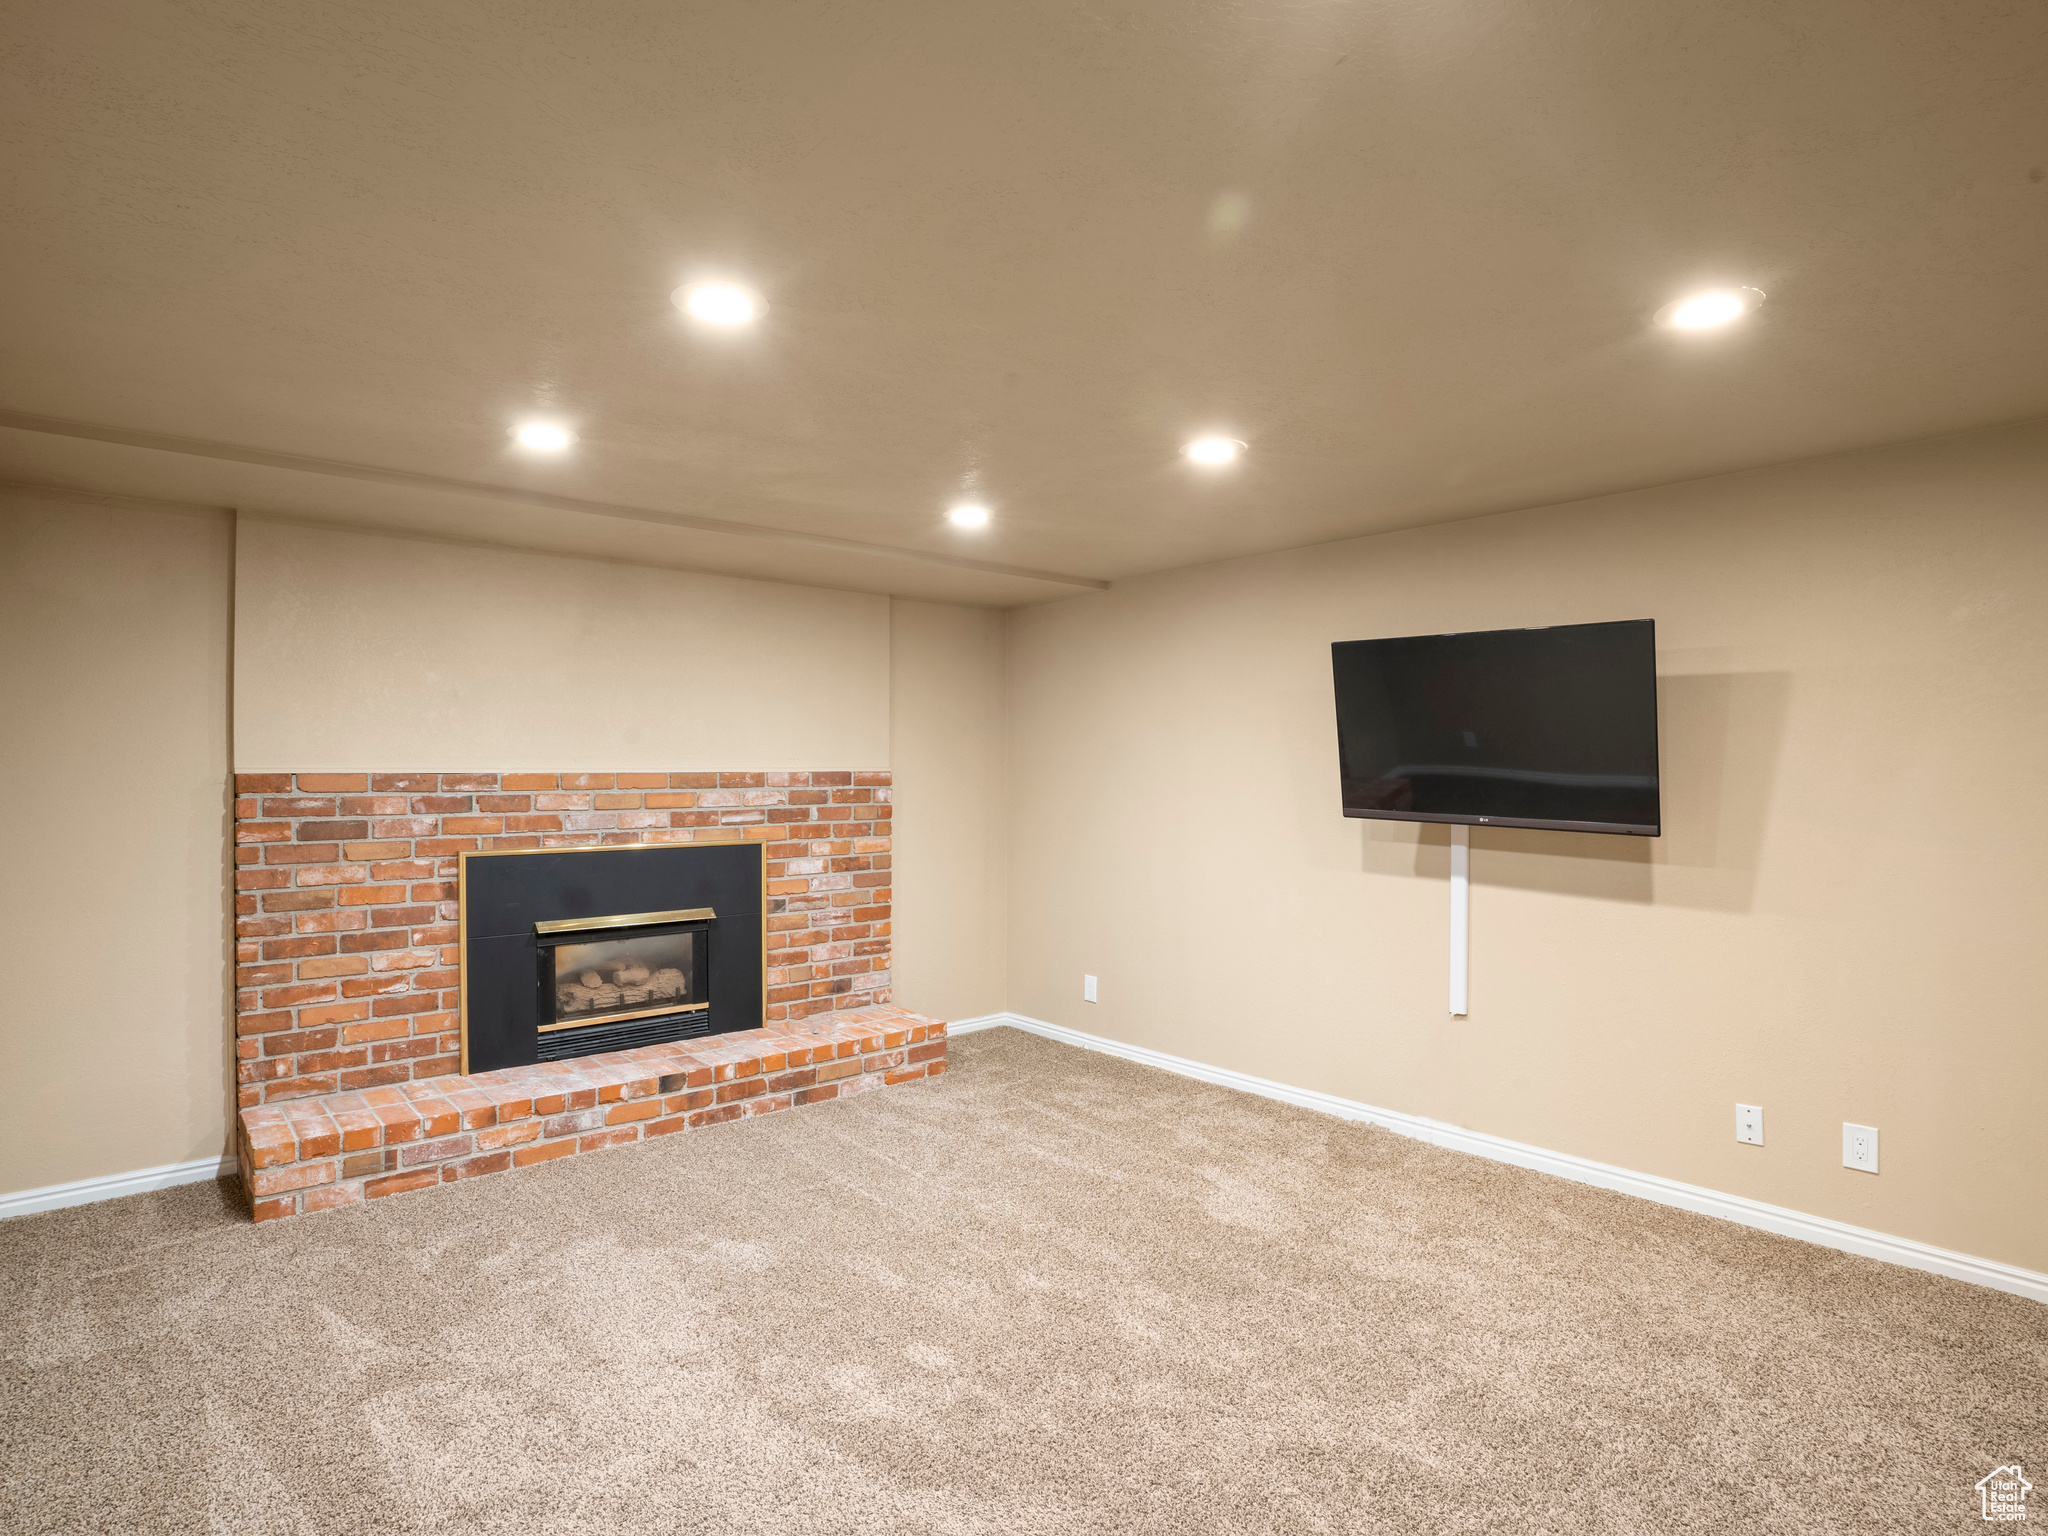 Unfurnished living room with carpet flooring and a fireplace